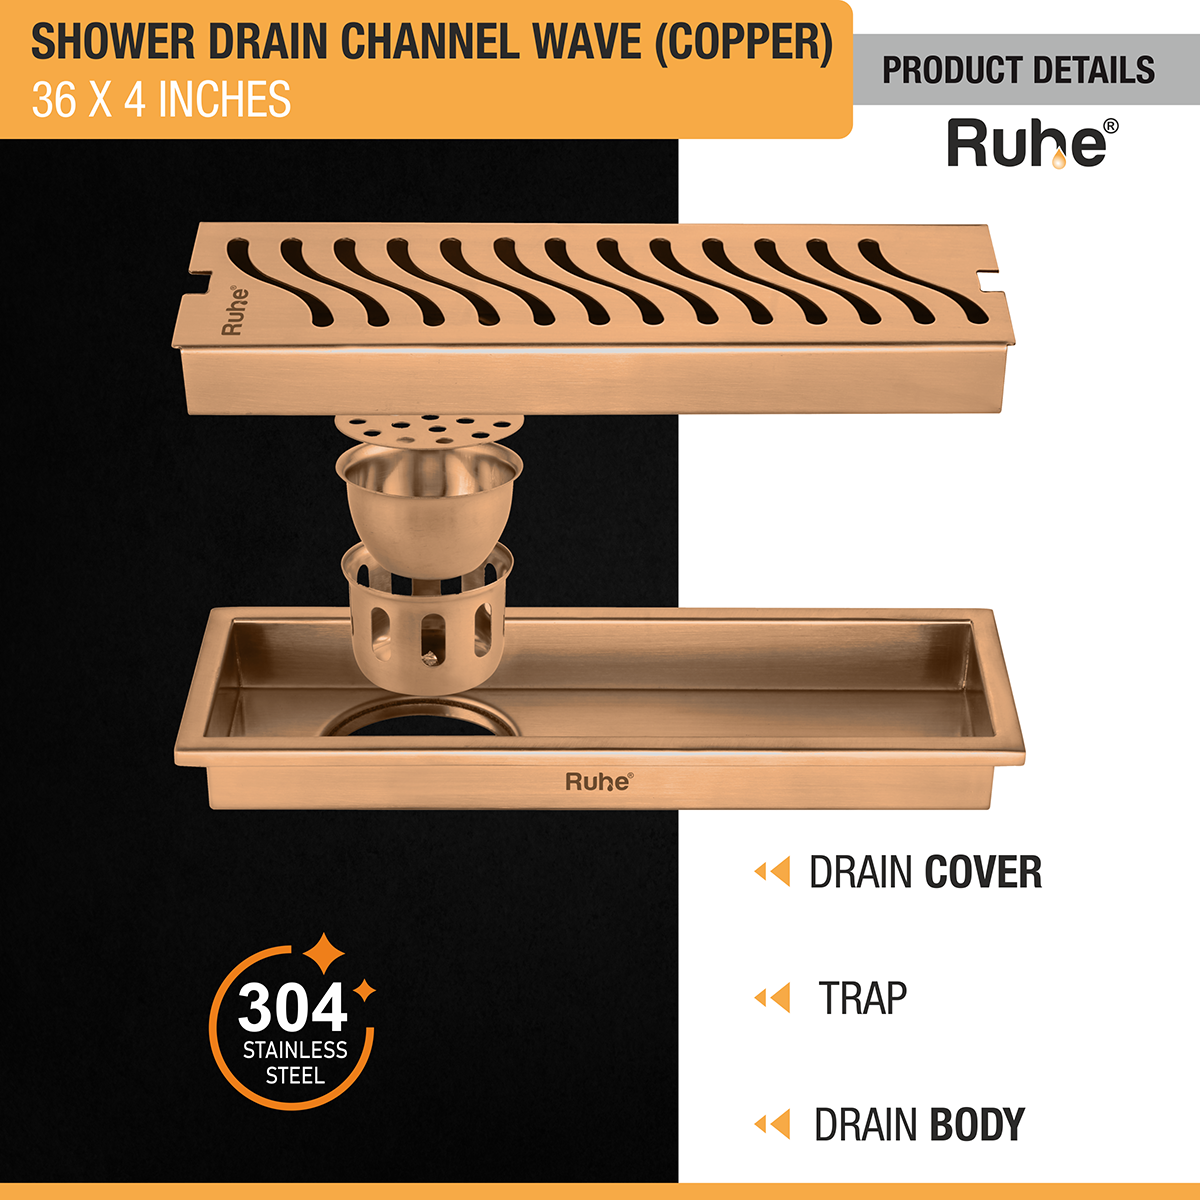 Wave Shower Drain Channel (36 x 4 Inches) ROSE GOLD/ANTIQUE COPPER product details